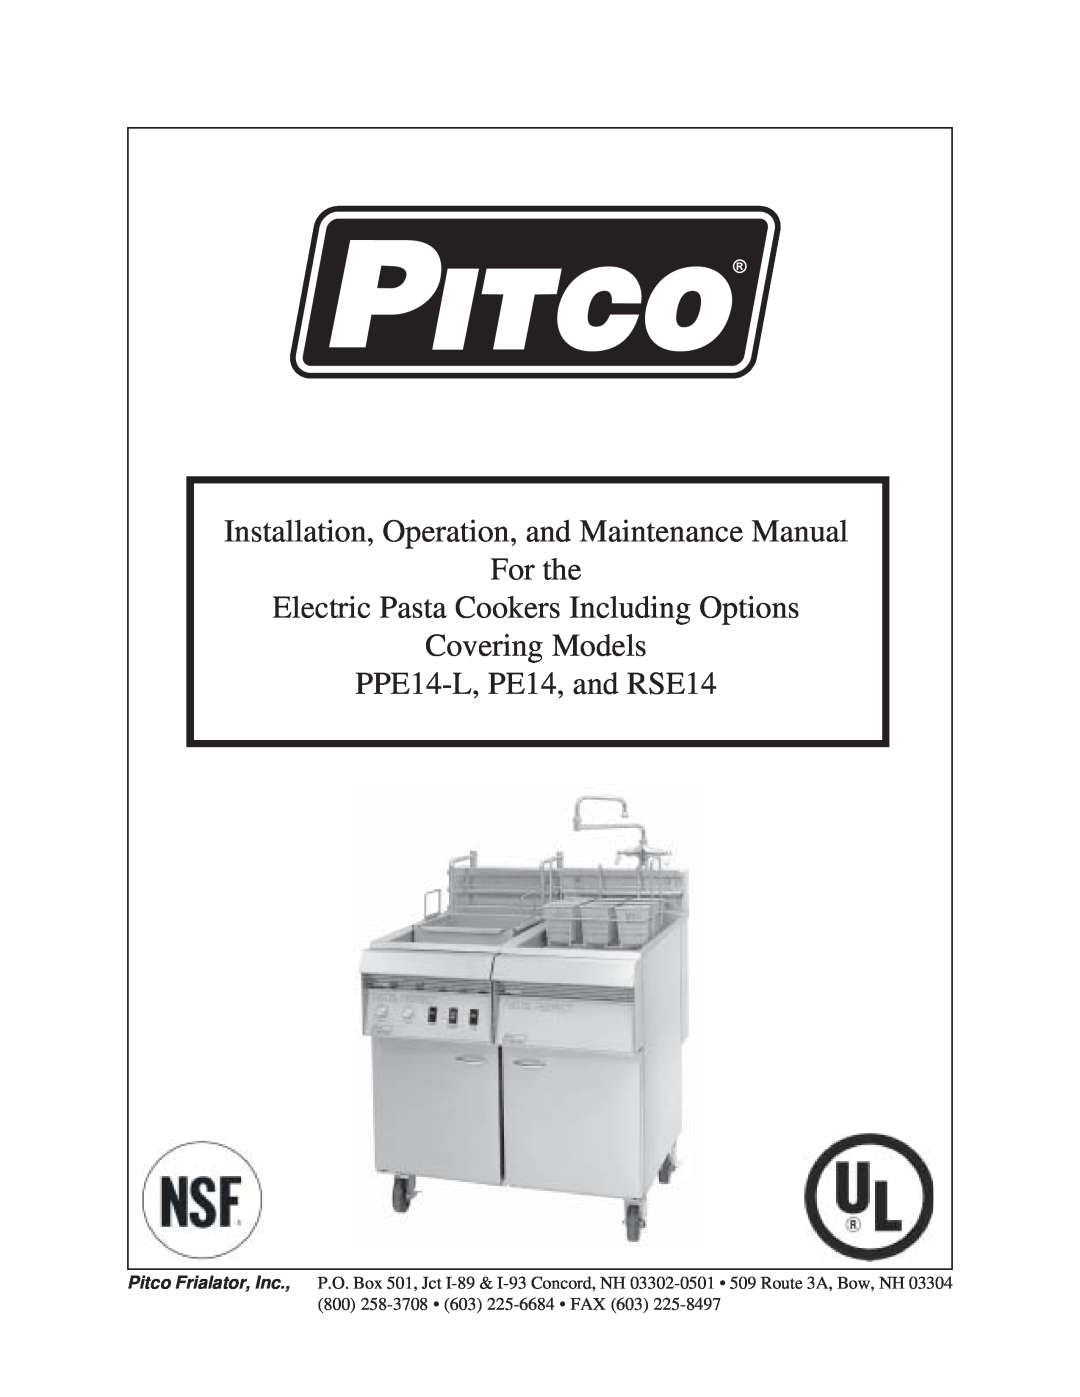 Pitco Frialator PE14 manual Installation, Operation, and Maintenance Manual, Electric Pasta Cookers Including Options 